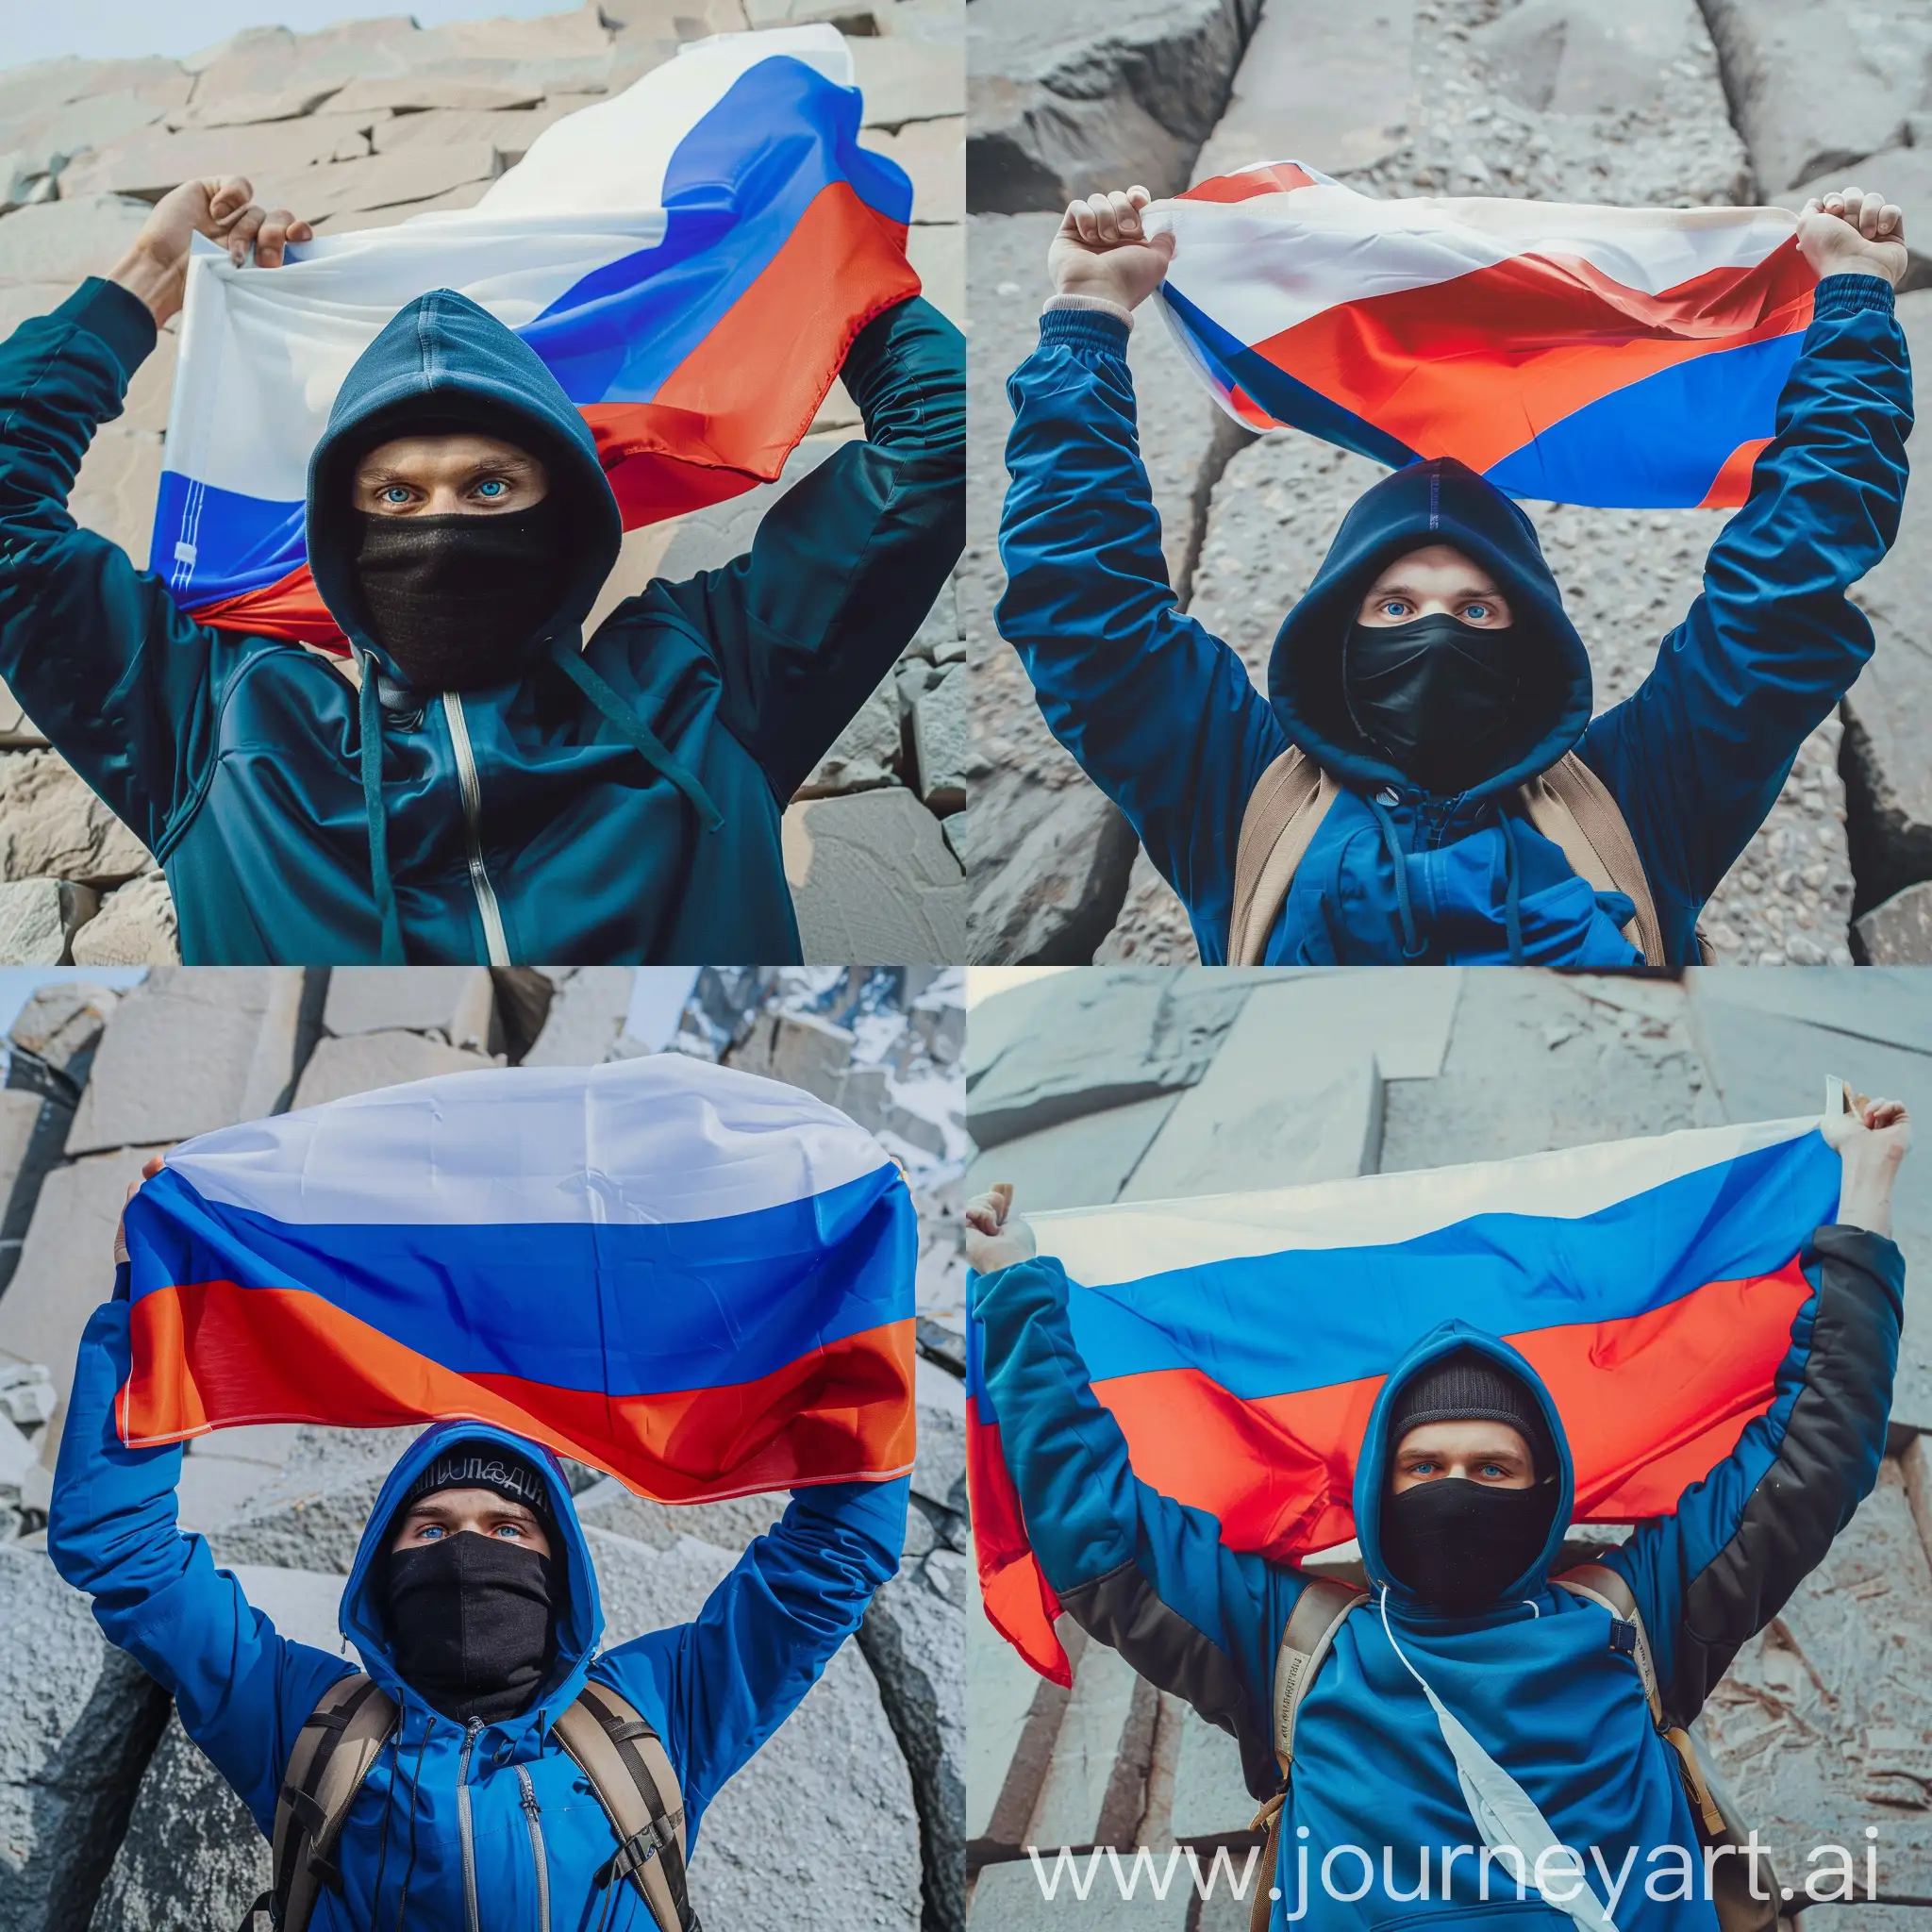 Unidentified-Figure-Proudly-Waving-Russian-Flag-Against-Stone-Wall